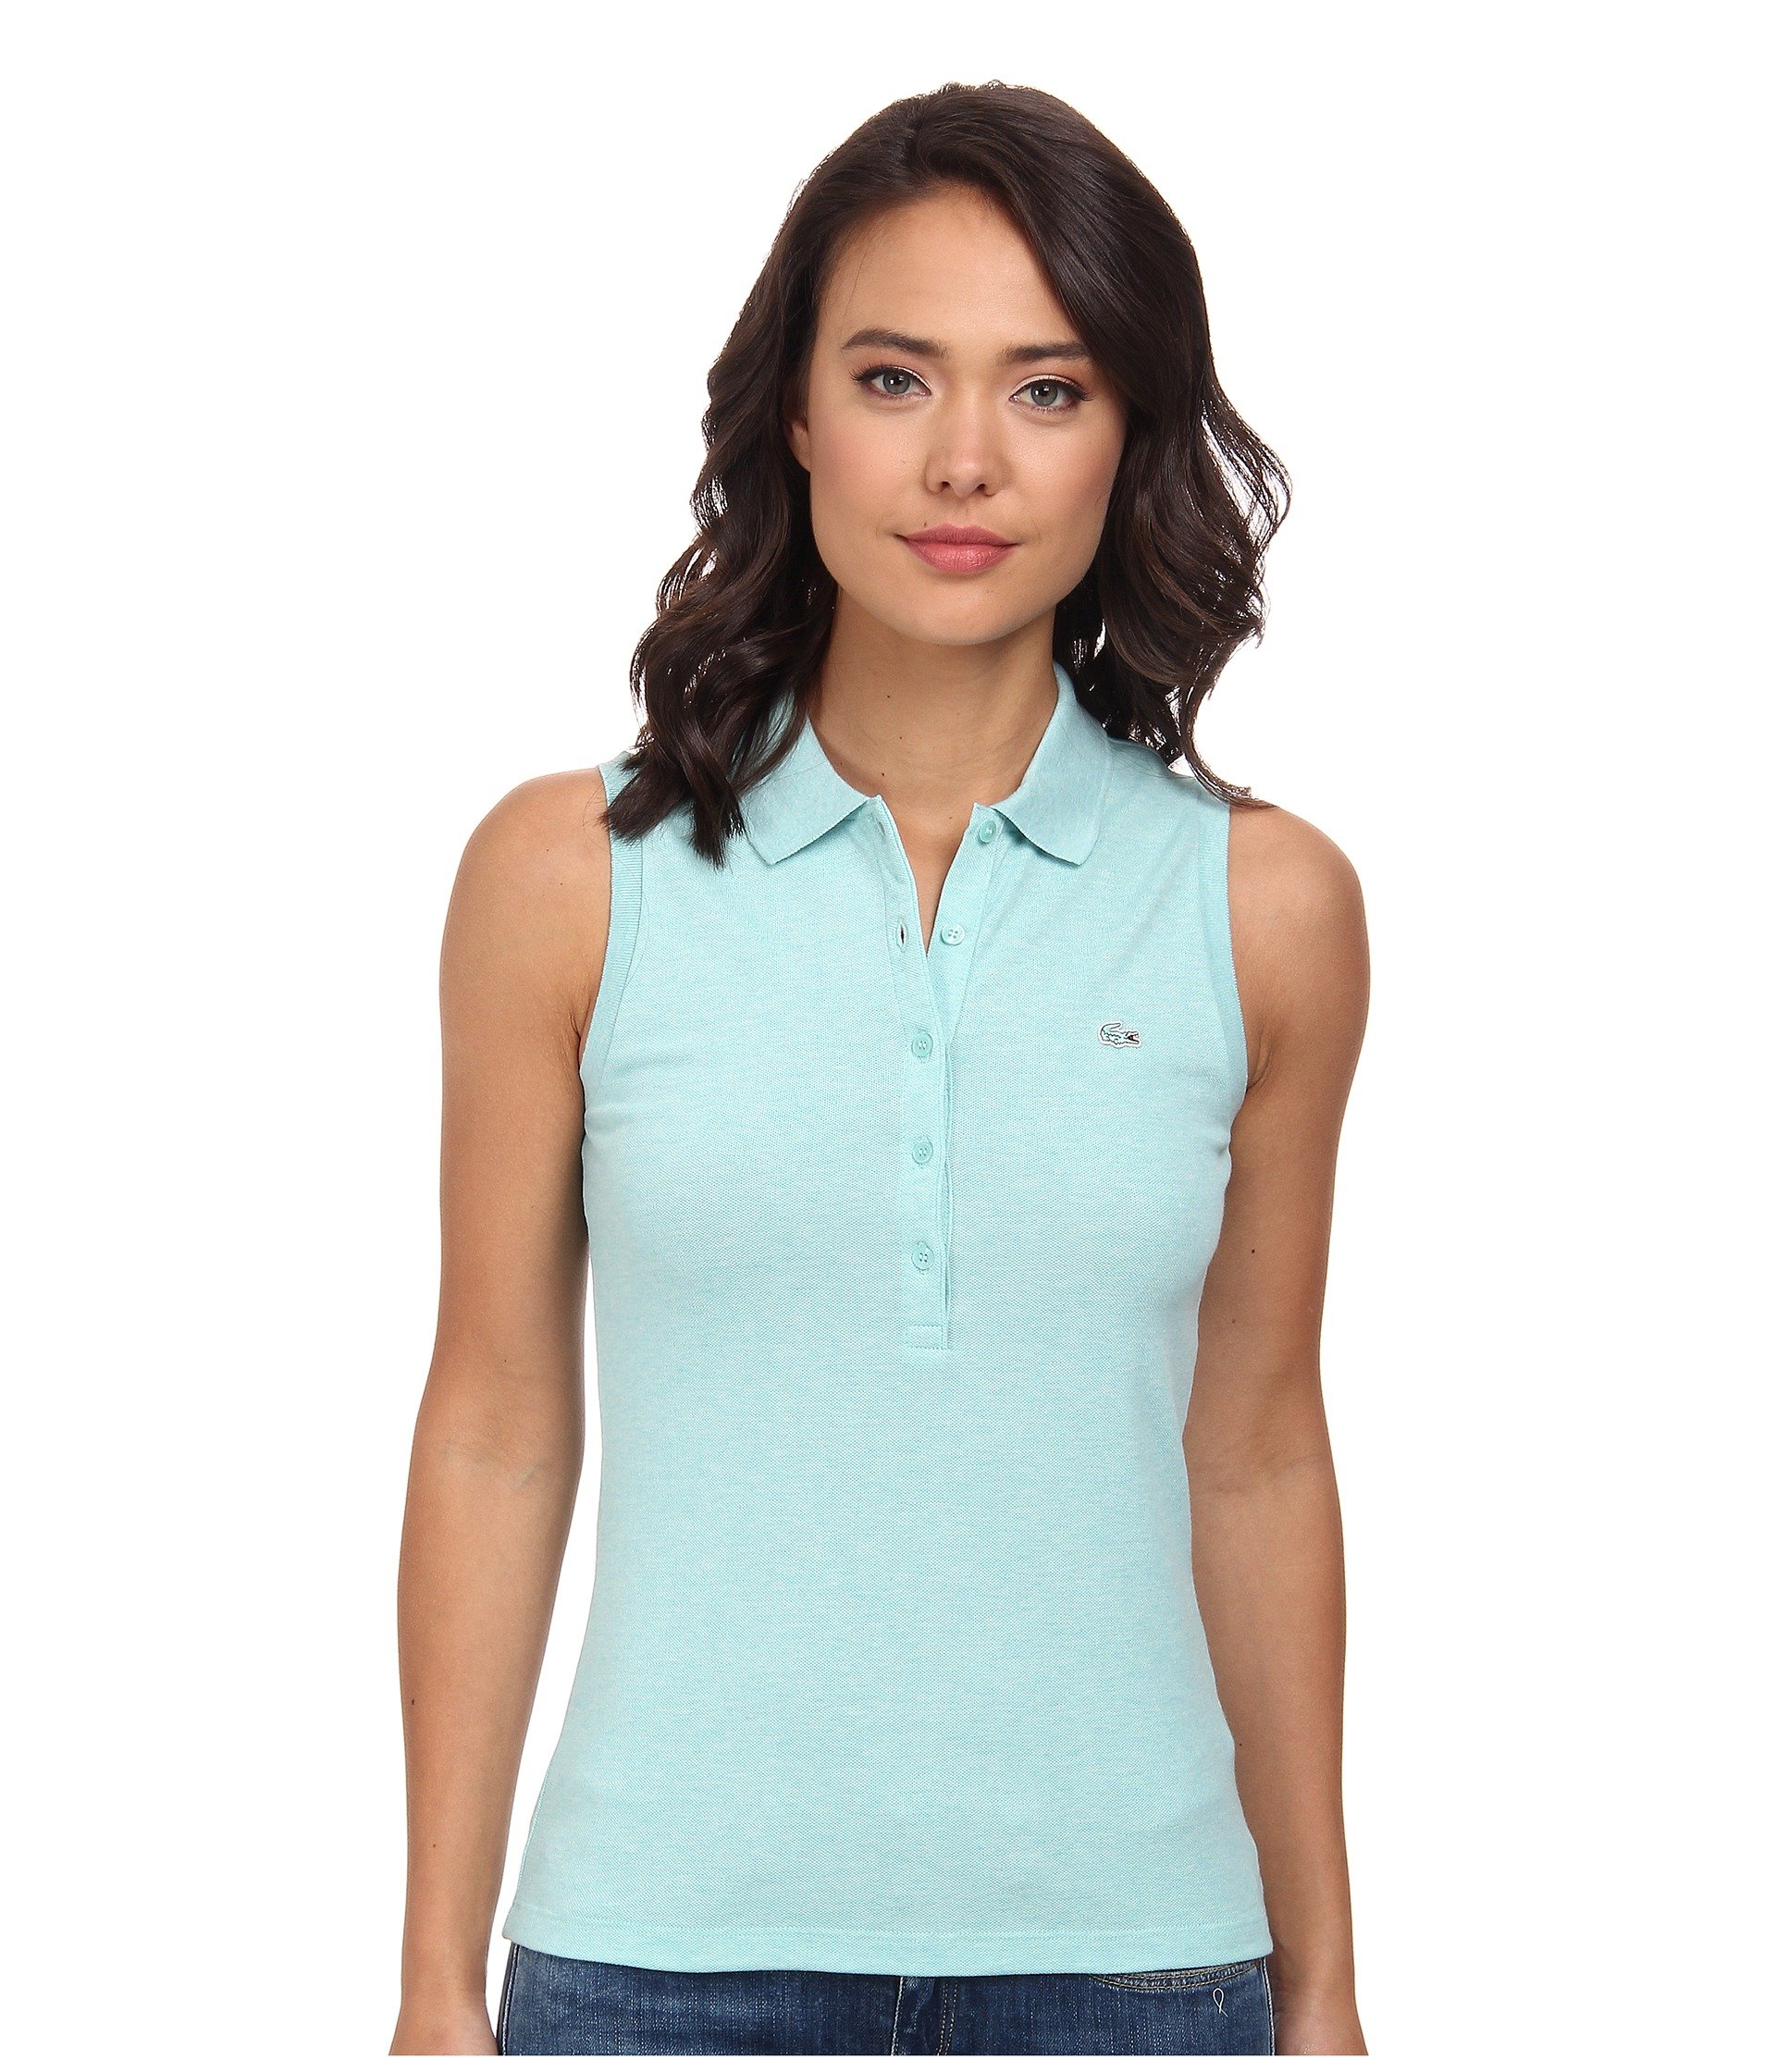 Lacoste Sleeveless Slim Fit Stretch Pique Polo Shirt in Blue (Corsica ...